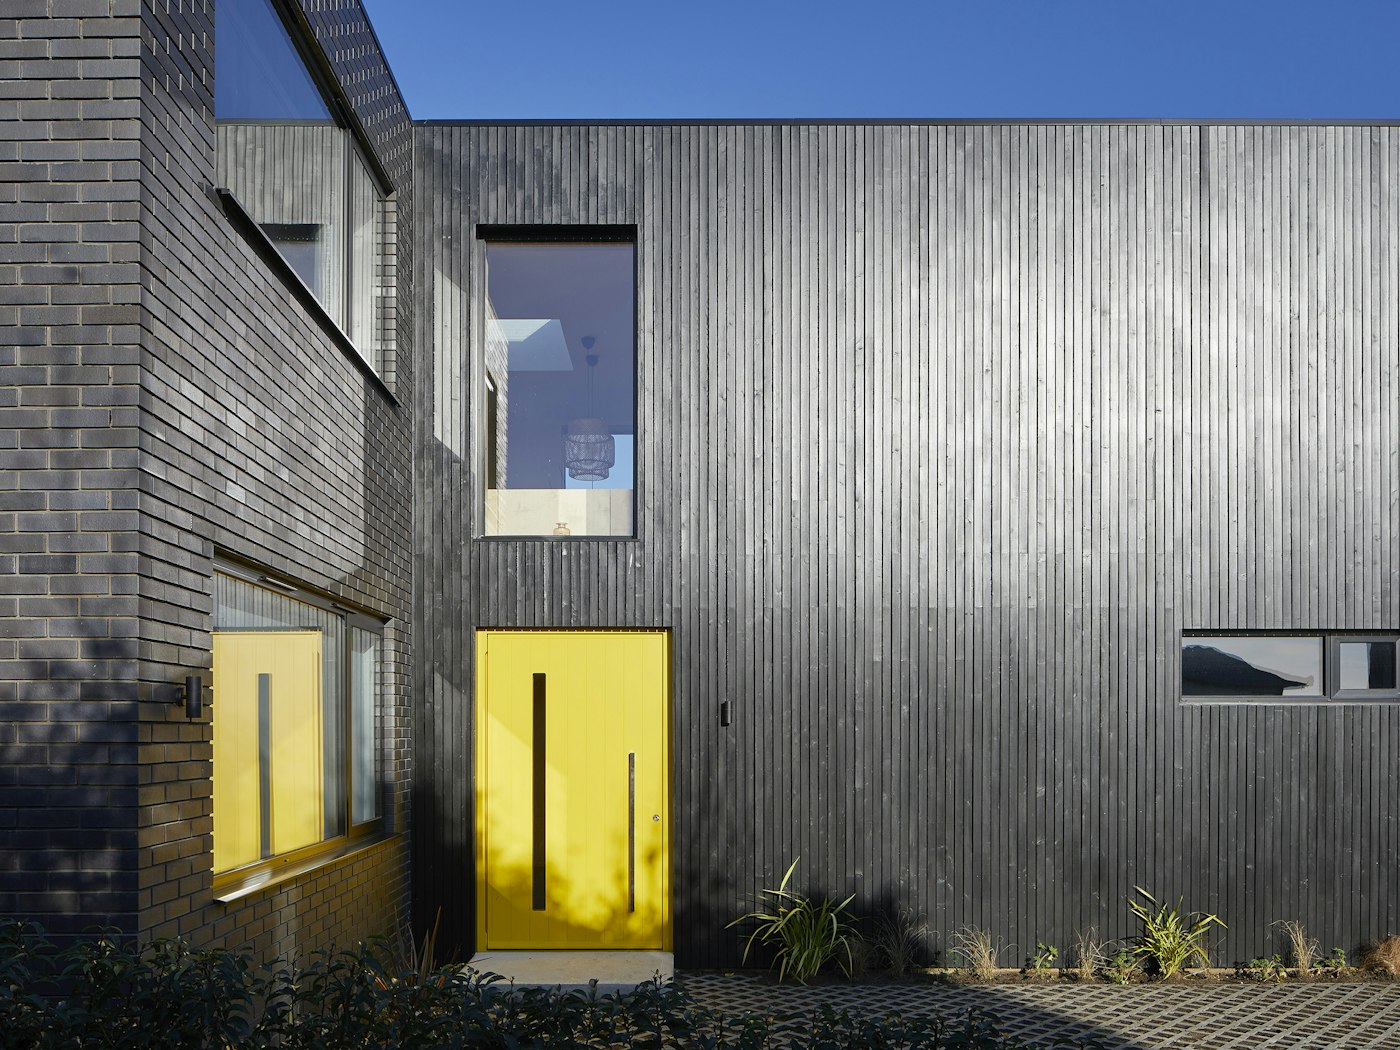 here a striking yellow door really makes a statement against the black cladding